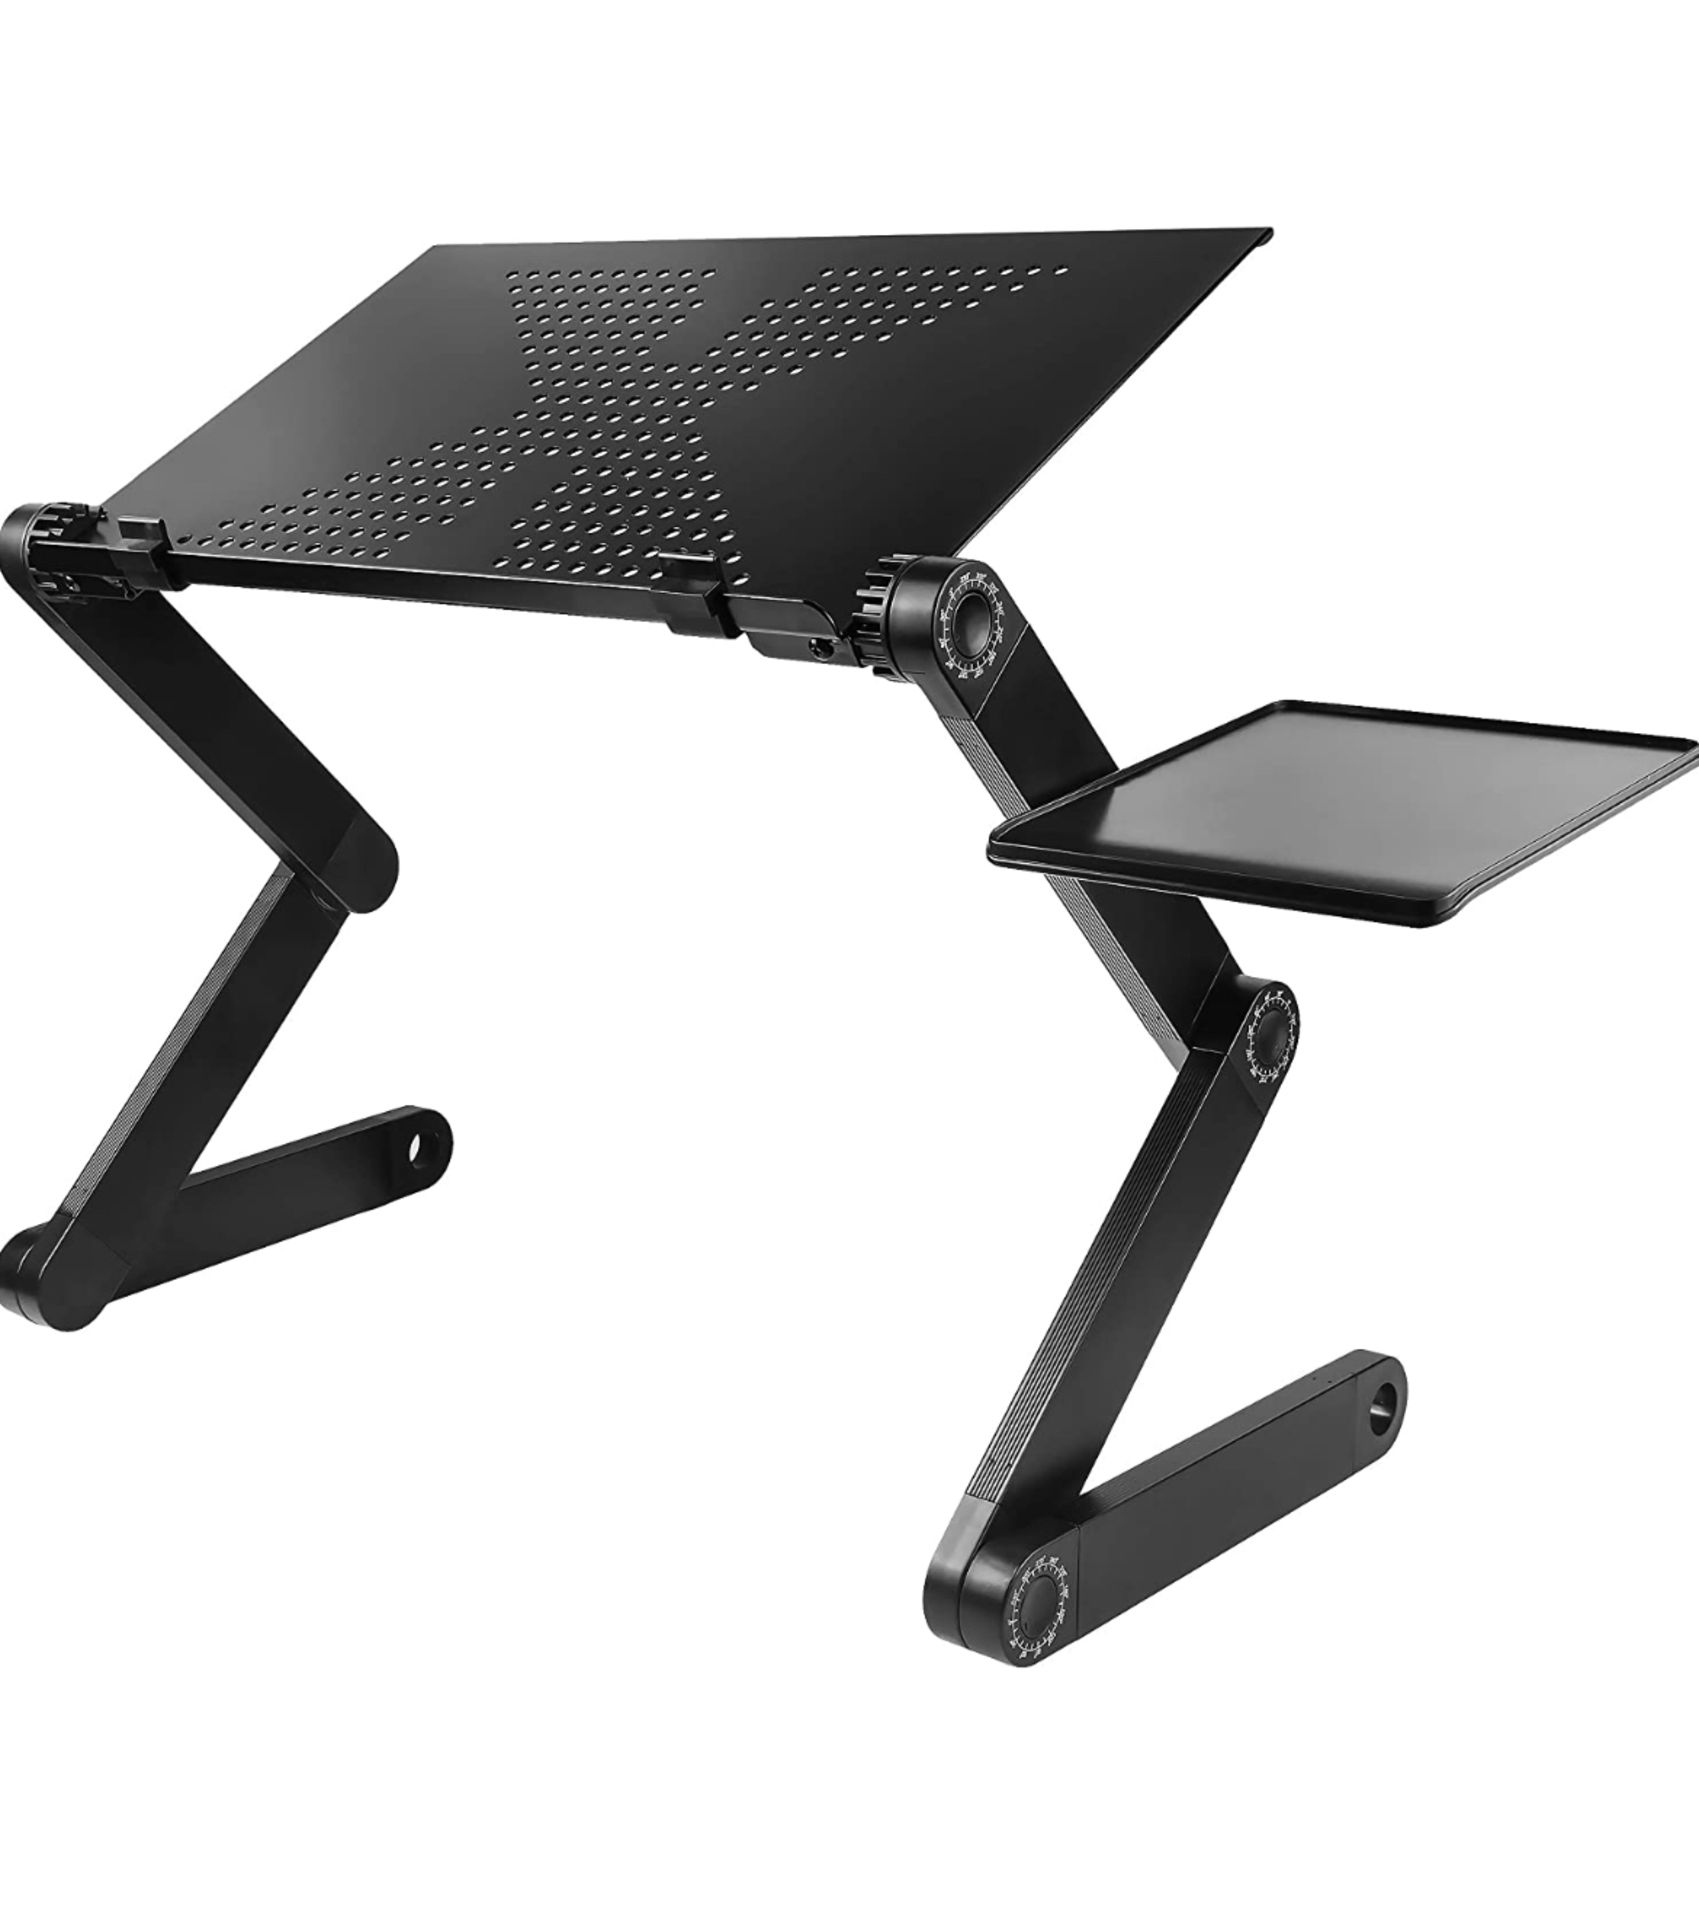 LAPTOP STAND/DESK BRAND NEW RRP £24.99